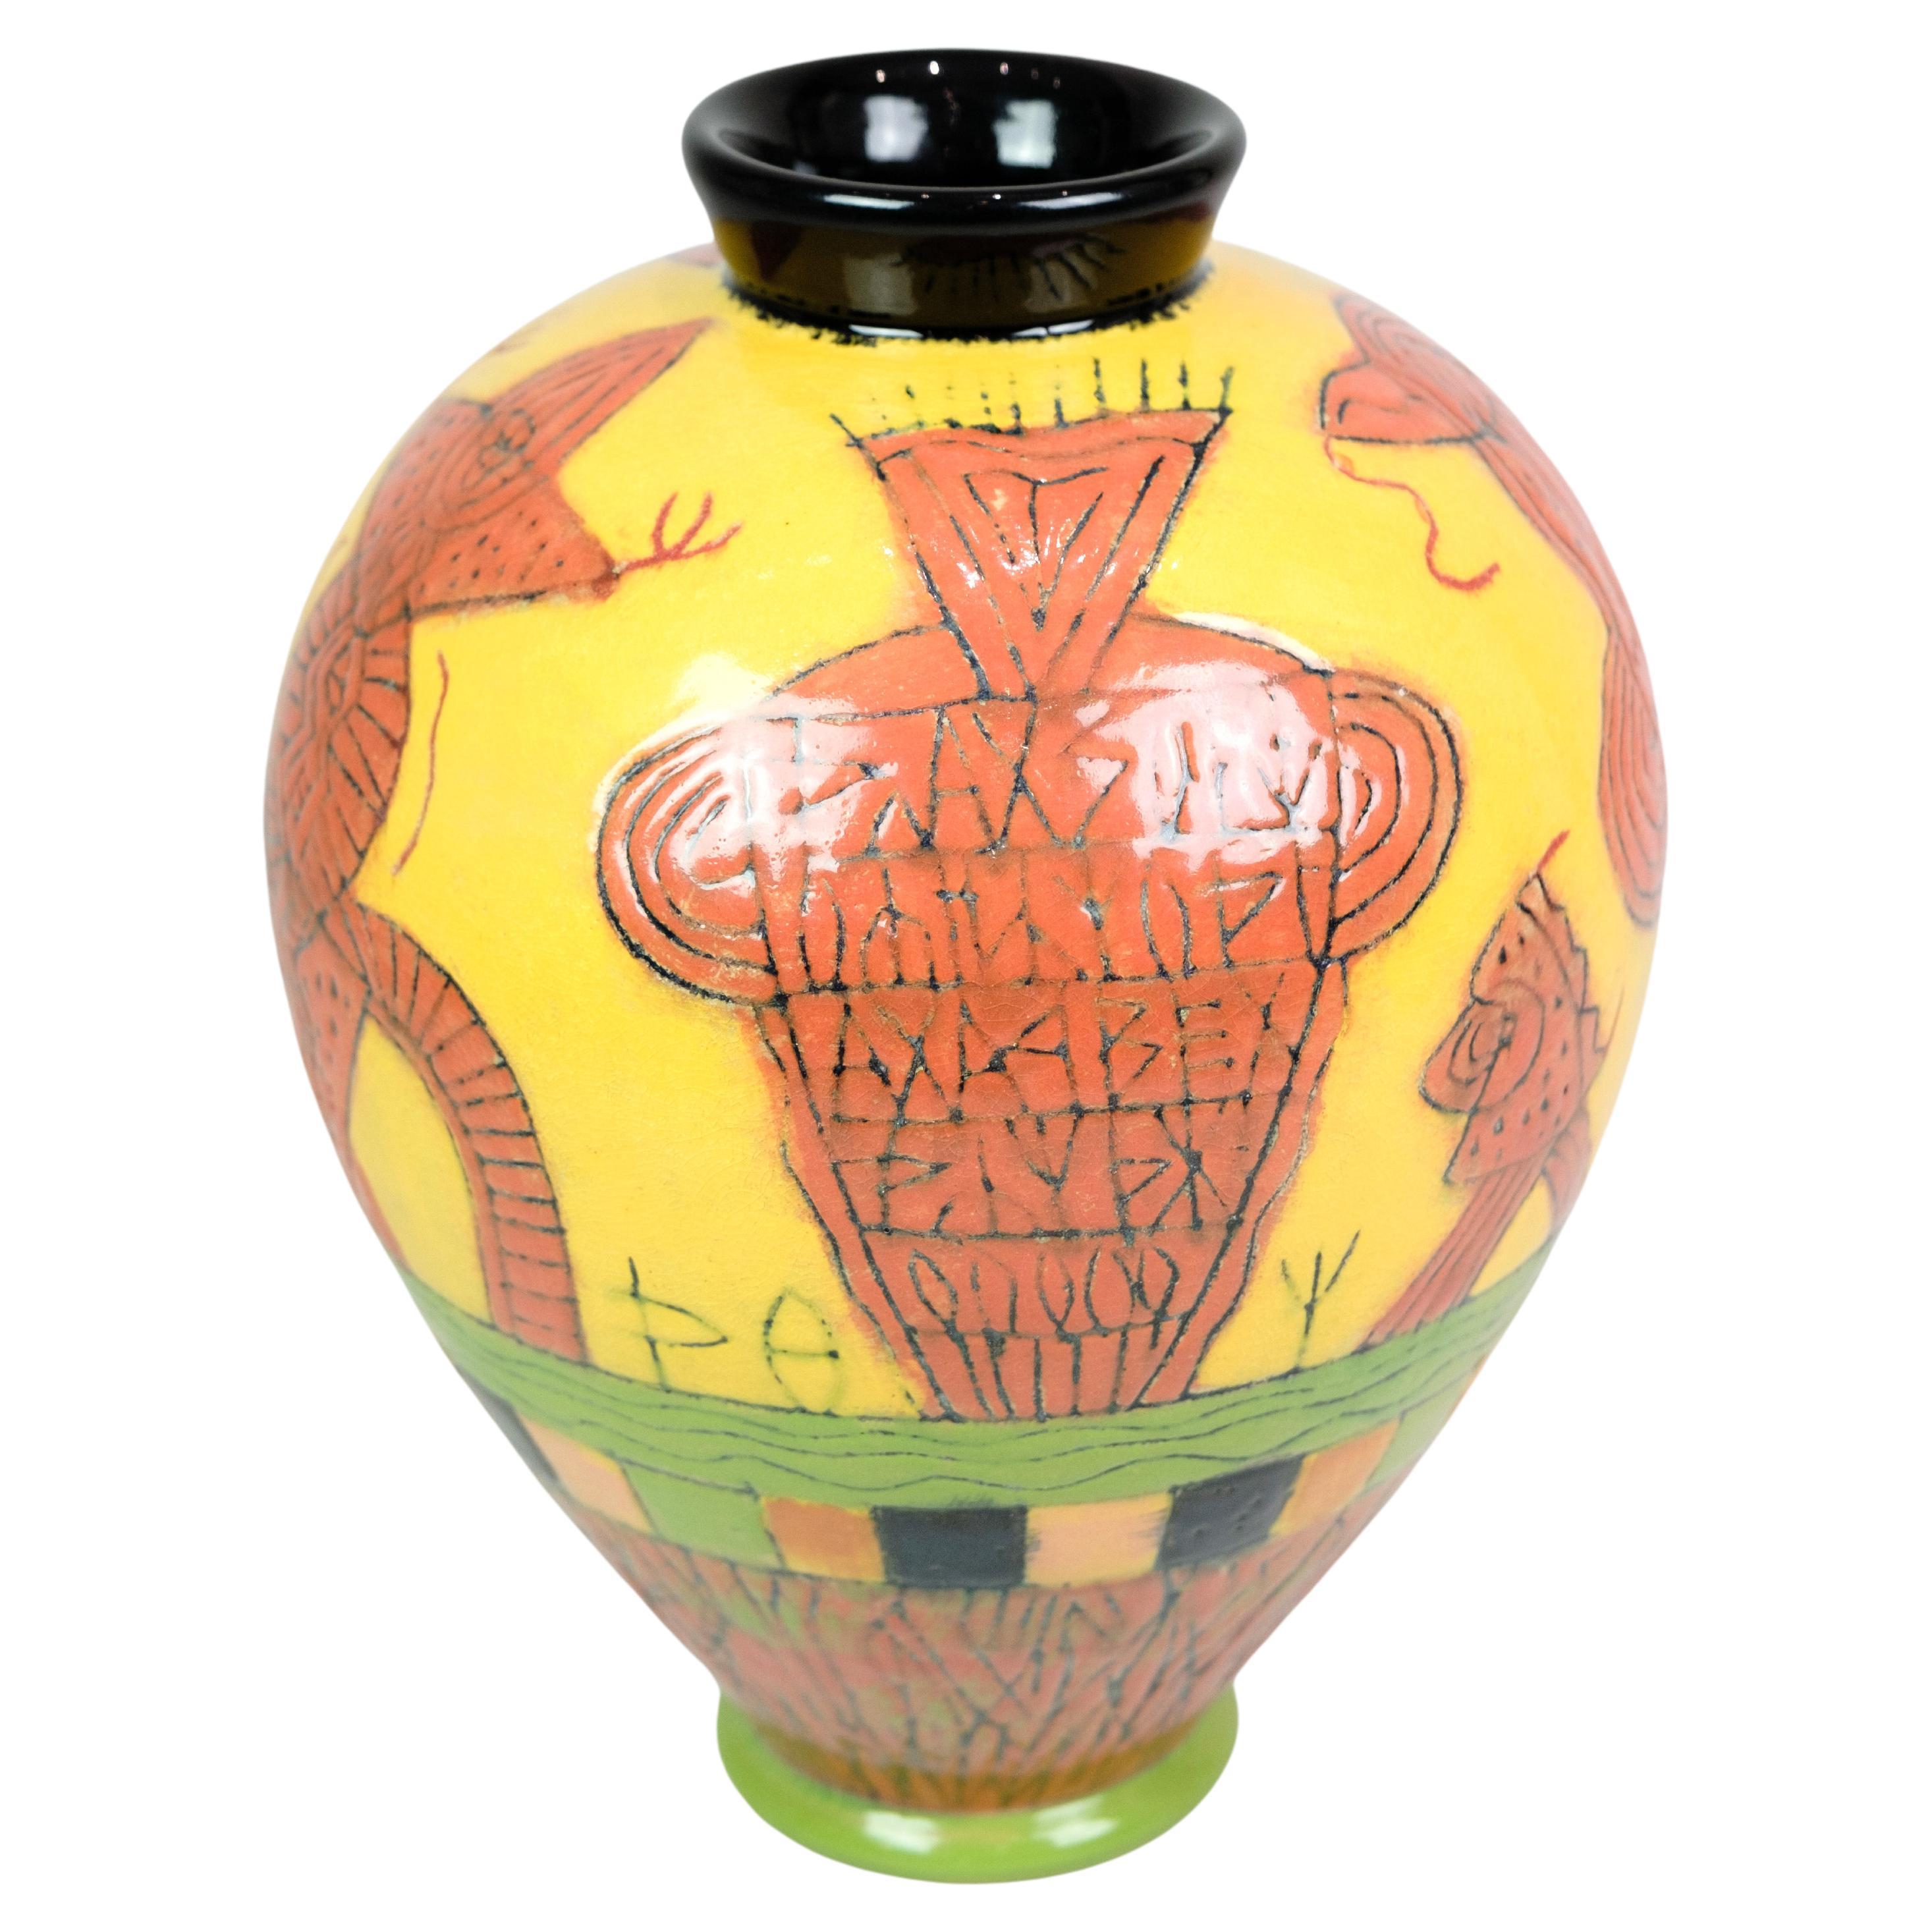 A Colorful Hand Painted Vase Designed And Signed By Lene Regius